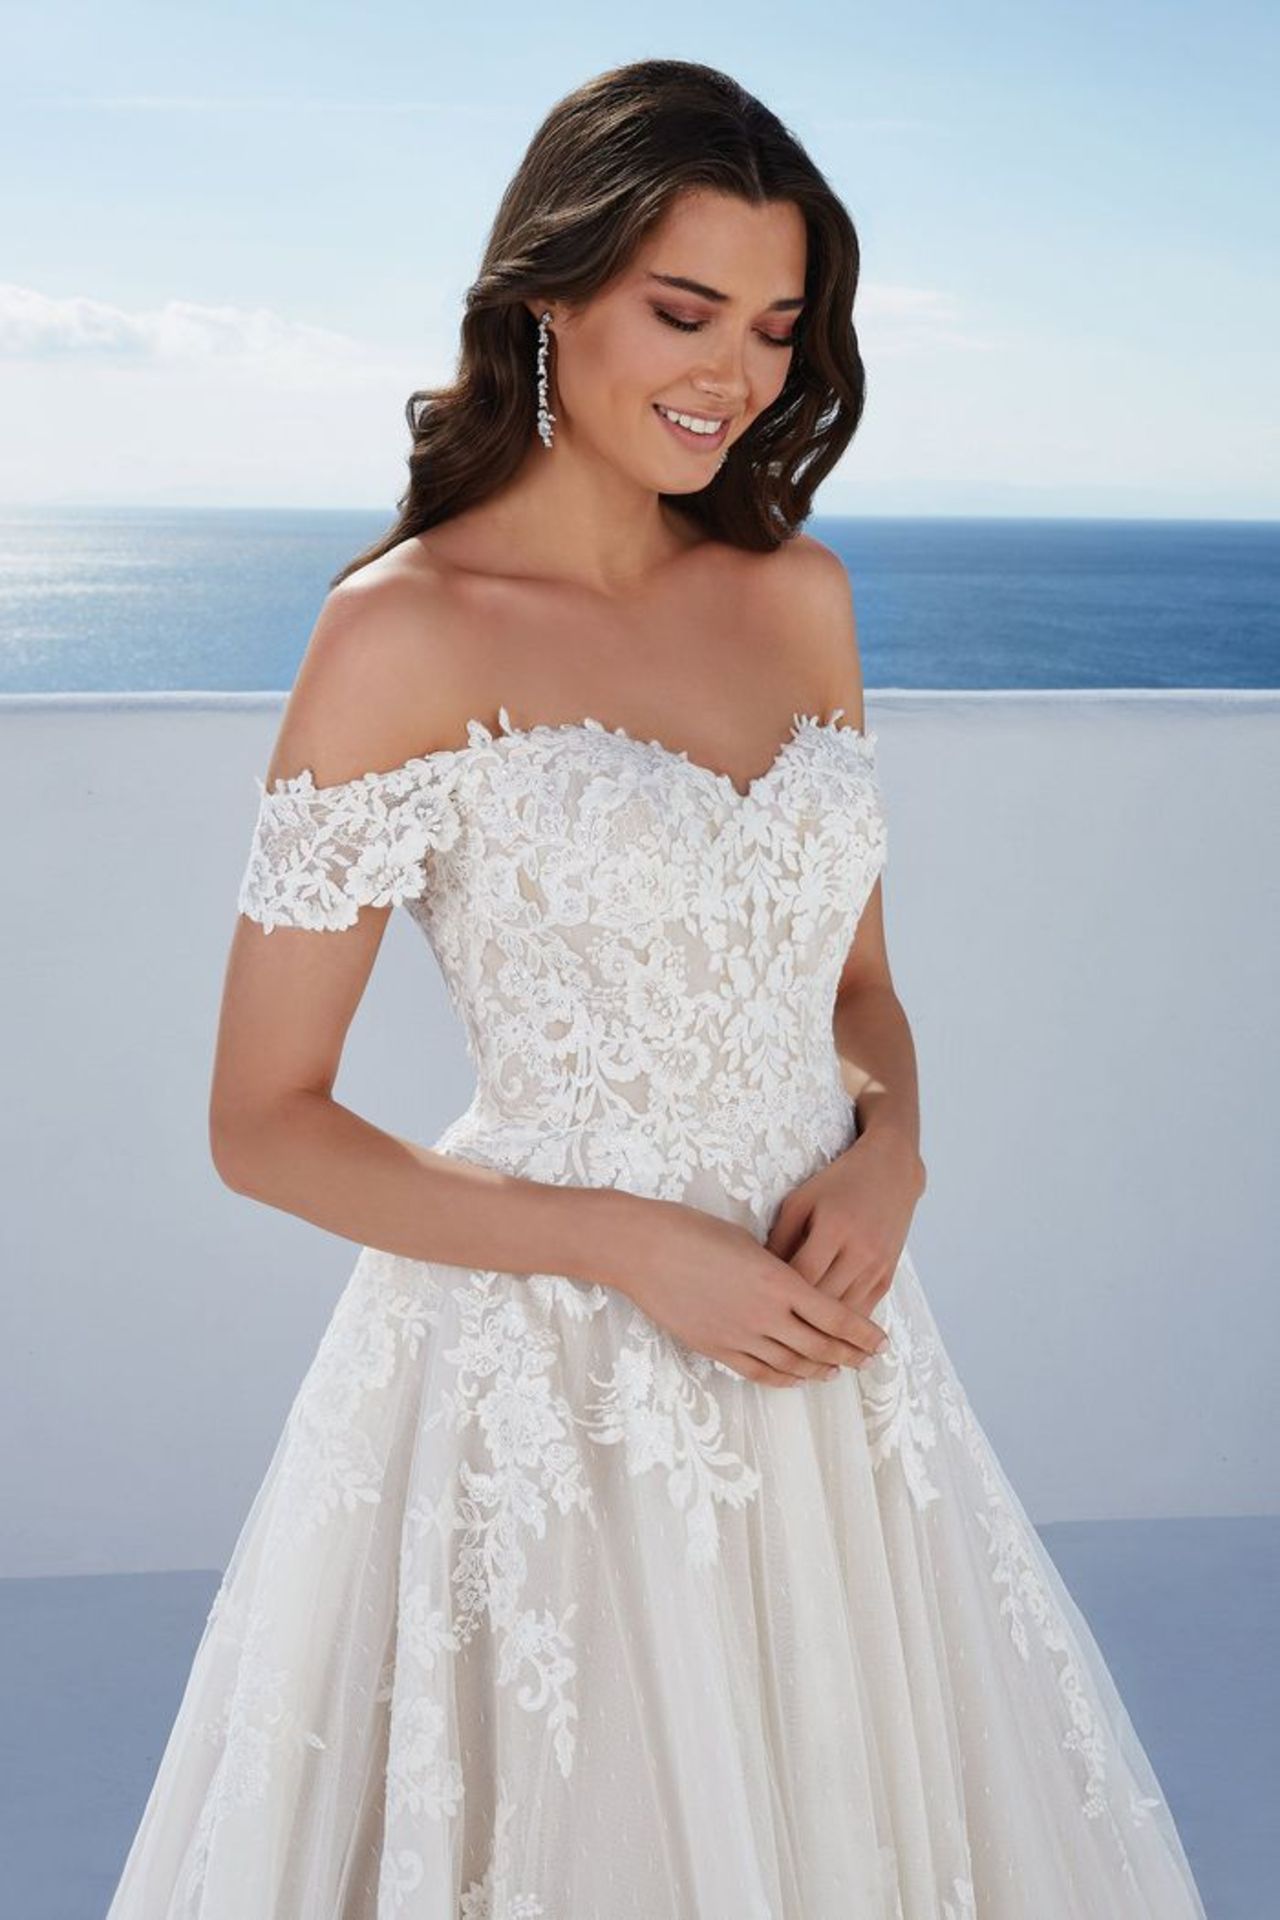 1 x Justin Alexander 'Venice' Tulle Ball Gown With Off the Shoulder Detail - UK Size 10 - RRP £1,854 - Image 11 of 15